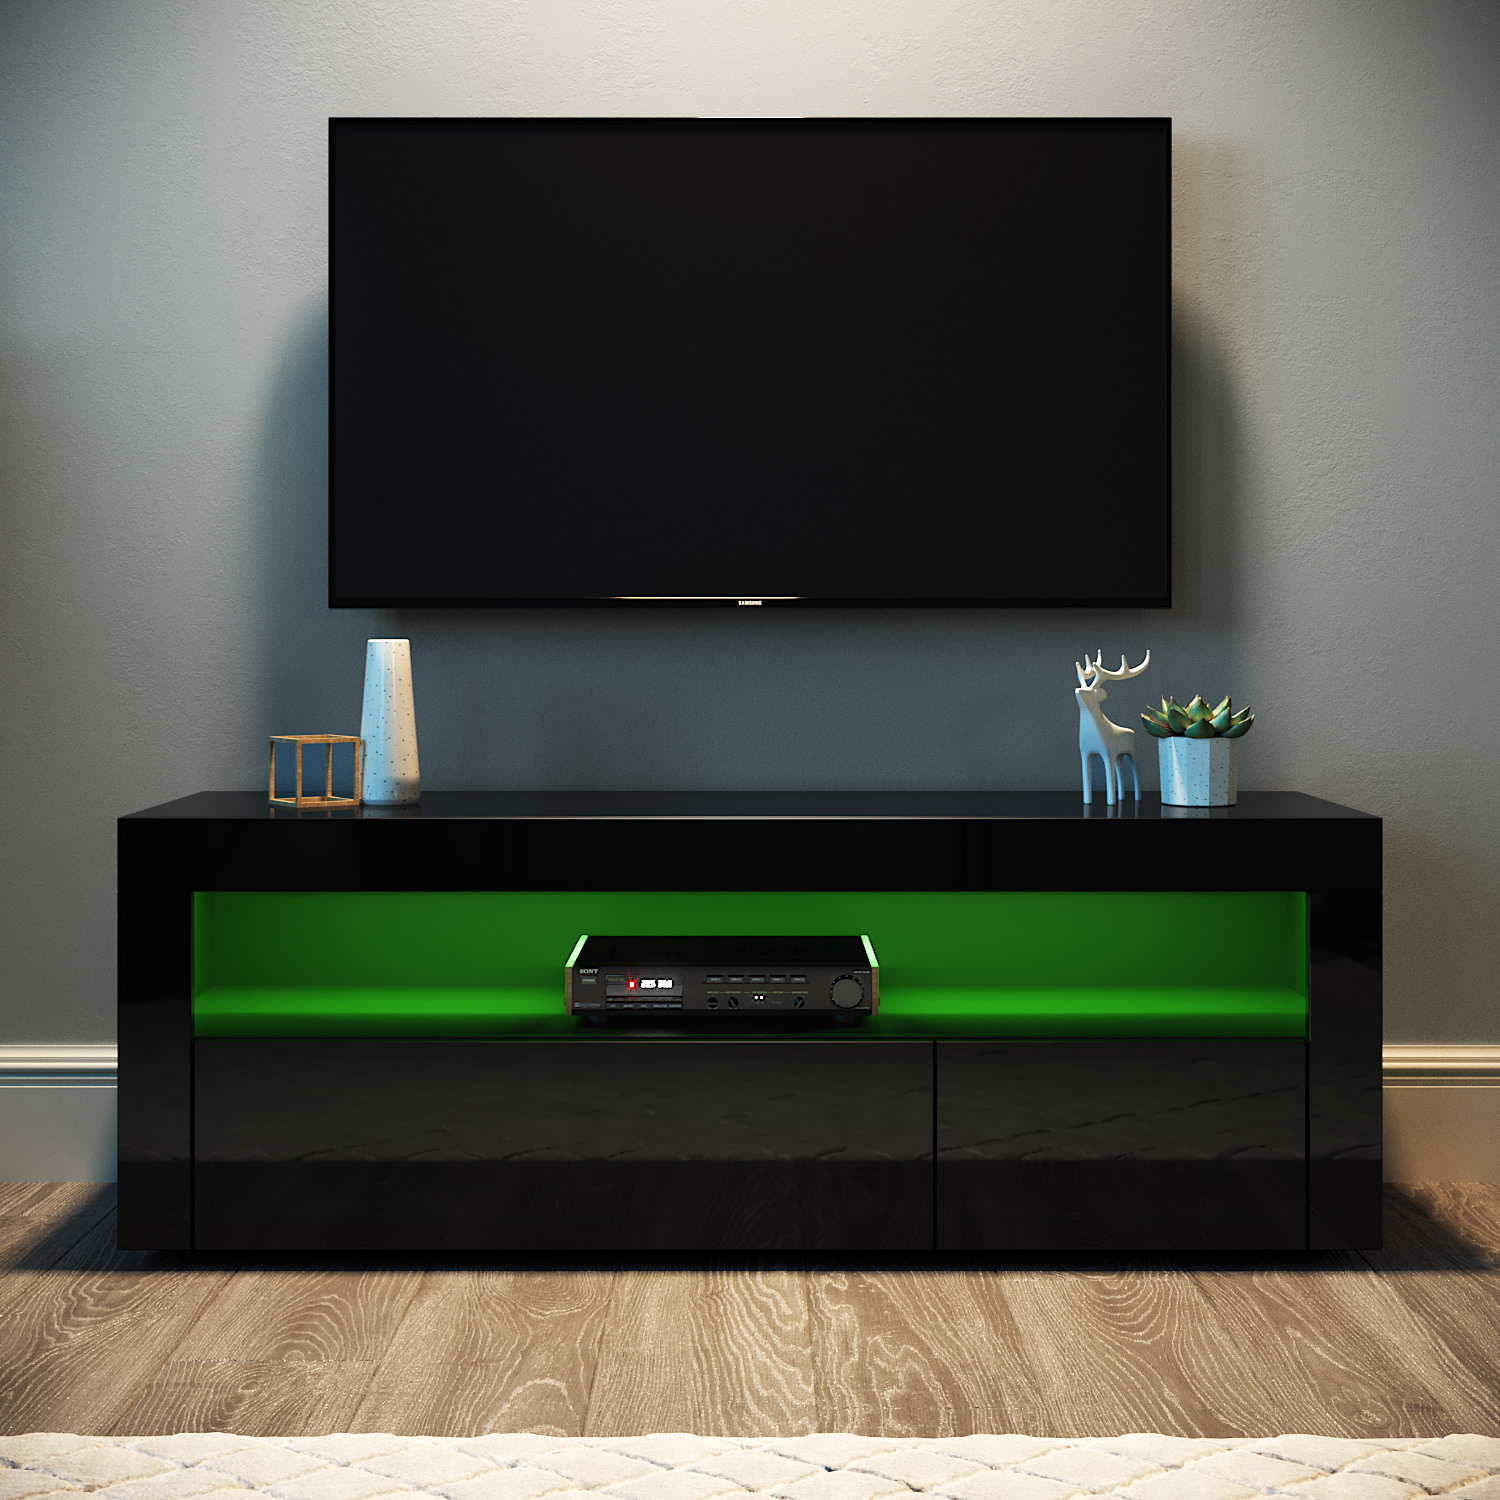 TV Stand With LED Light